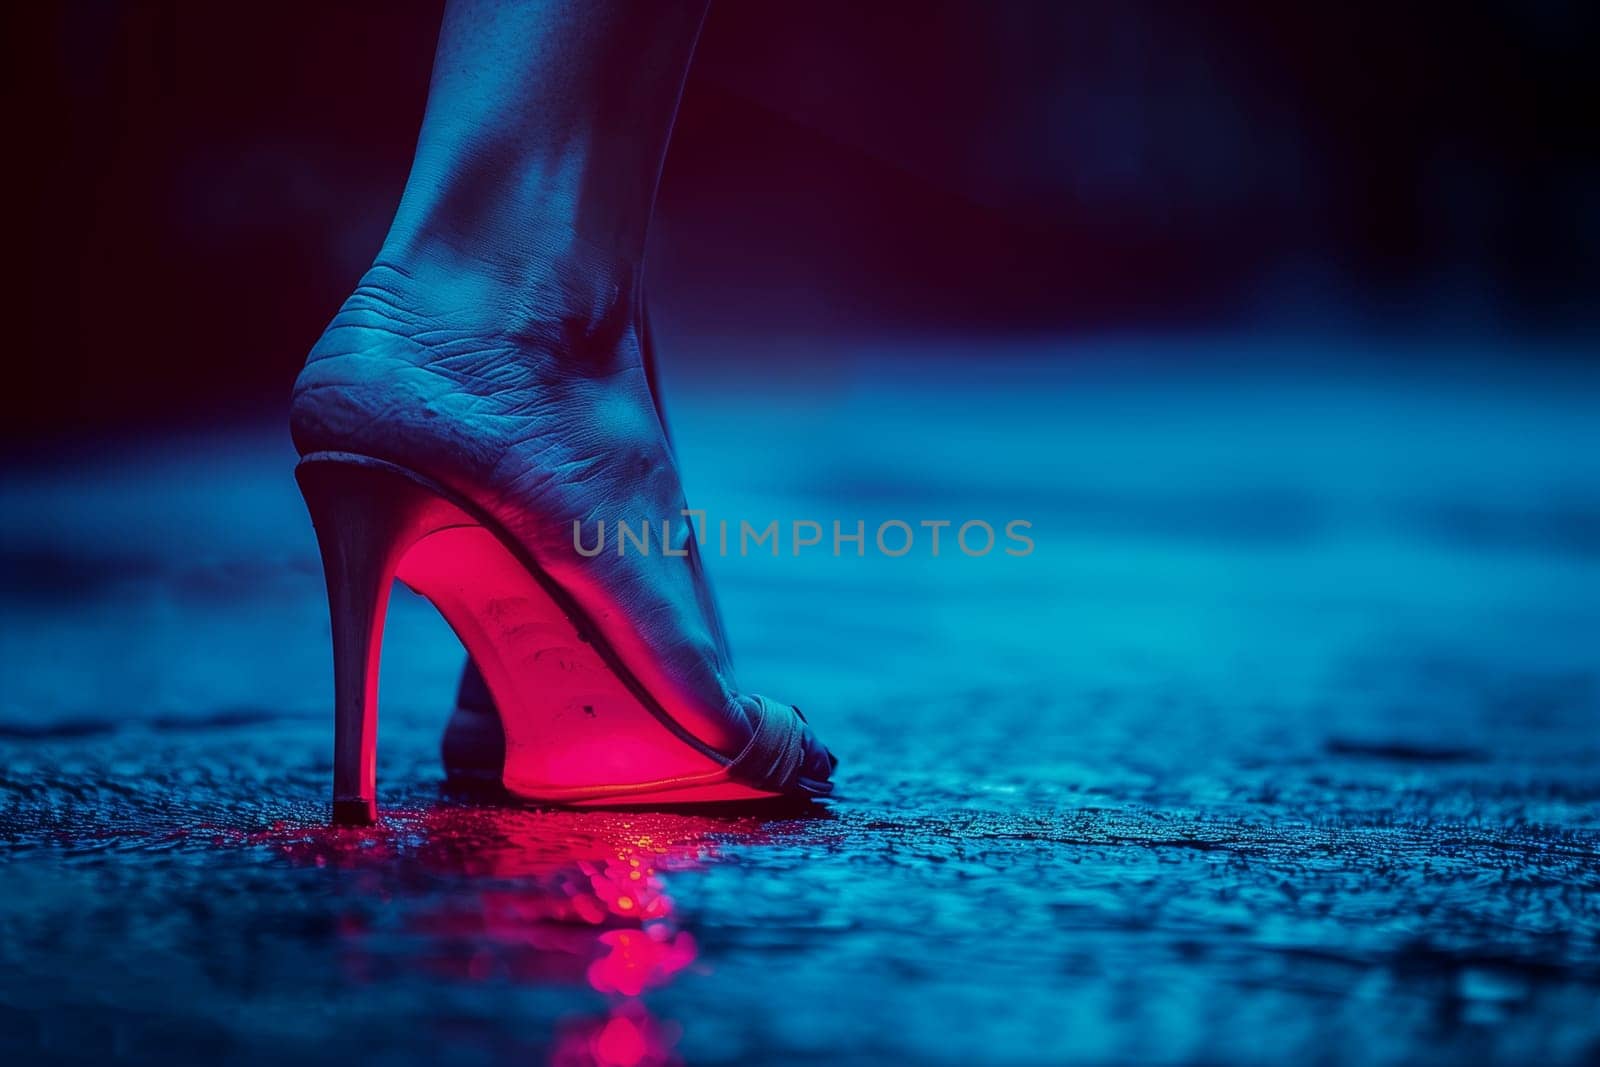 Glowing High Heel on Paved Street at Twilight by Sd28DimoN_1976